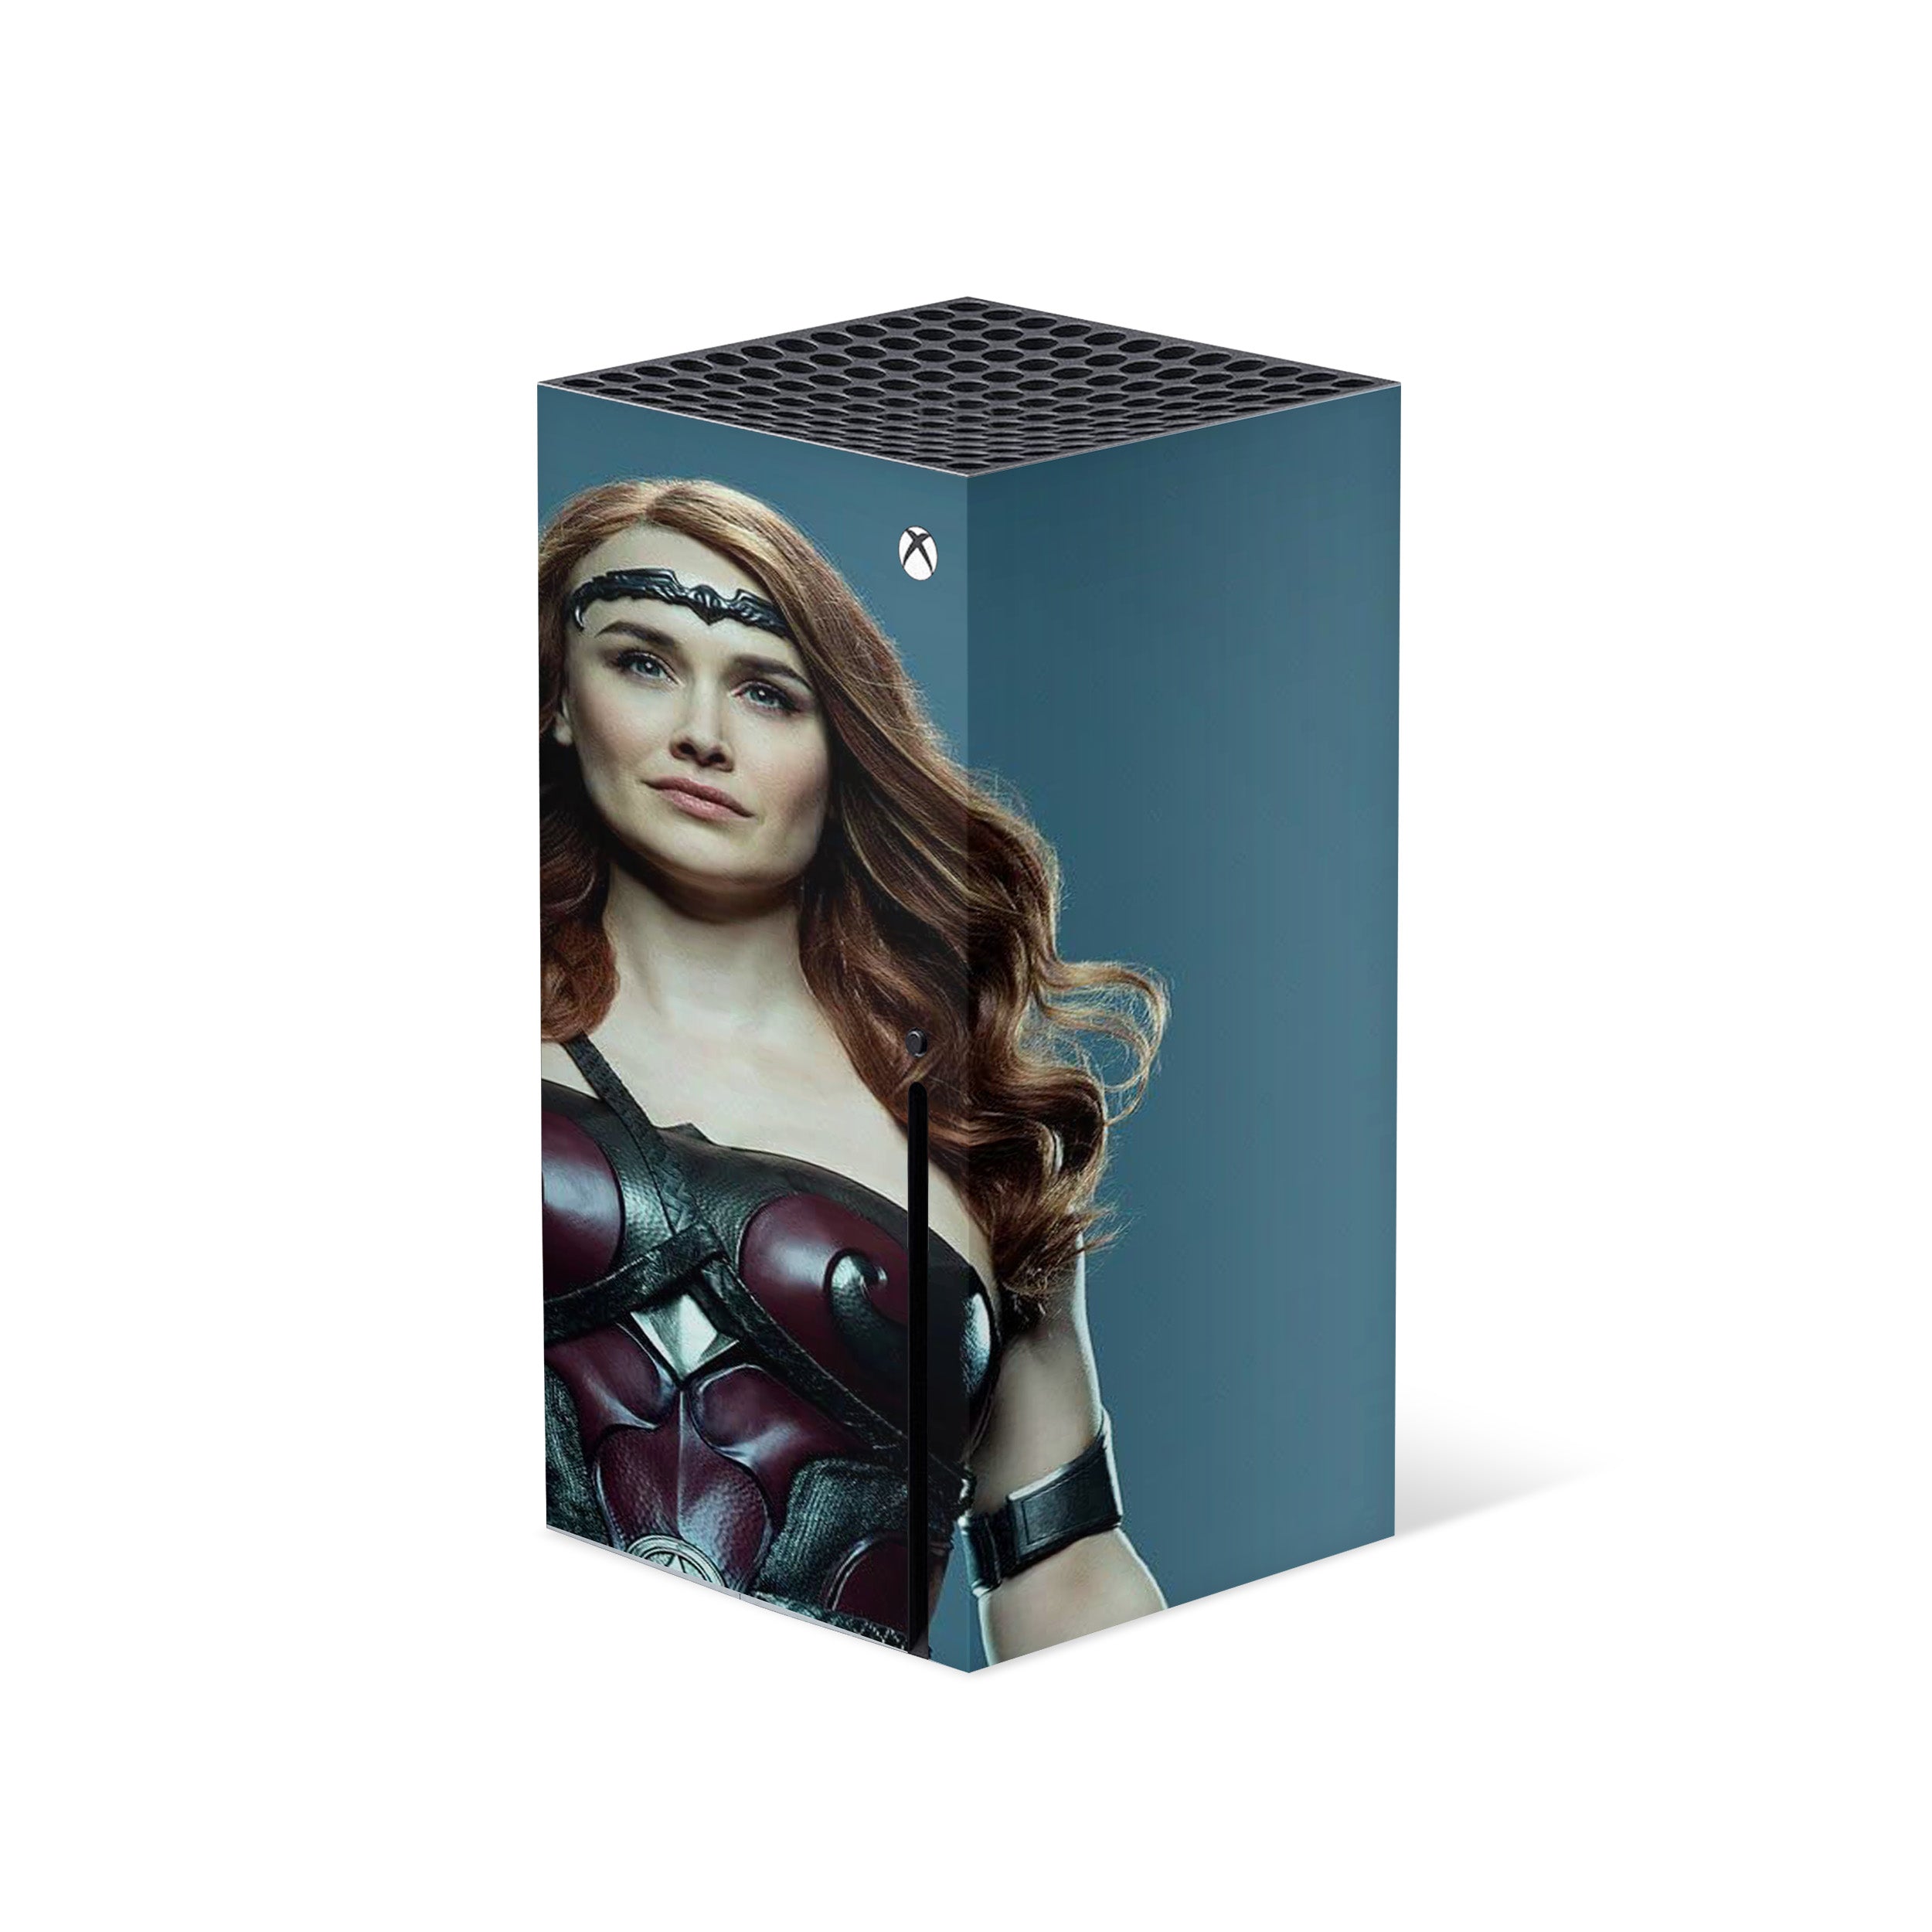 A video game skin featuring a The Boys Queen Meave design for the Xbox Series X.